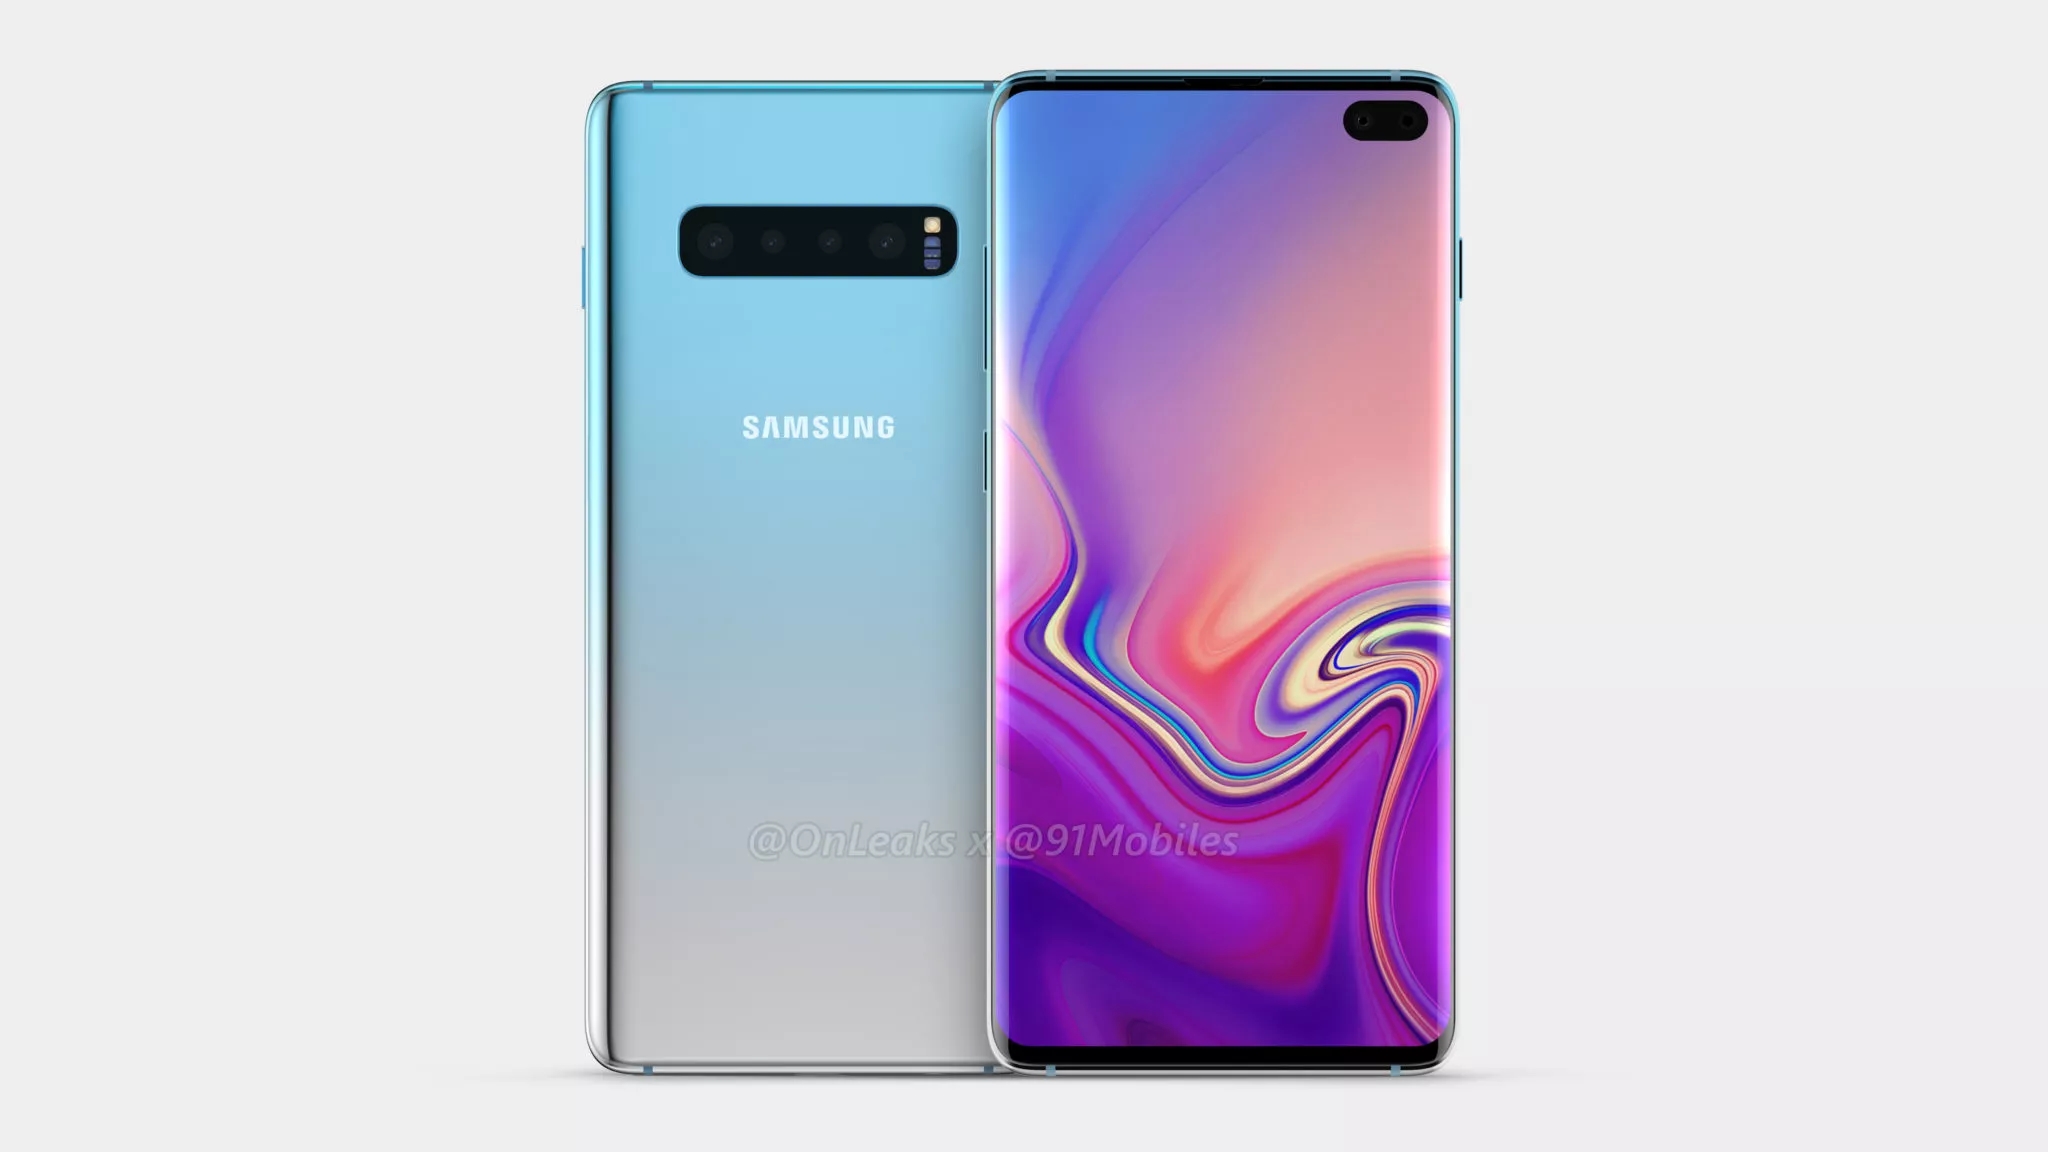 Samsung S 10 Plus - Samsung Galaxy Note 10 Plus Vs. Galaxy S10 Plus | Specs ... / The galaxy s10 plus was samsung's new 'everything phone' for 2019, helping disrupt the sameness of the last few generations of handsets.